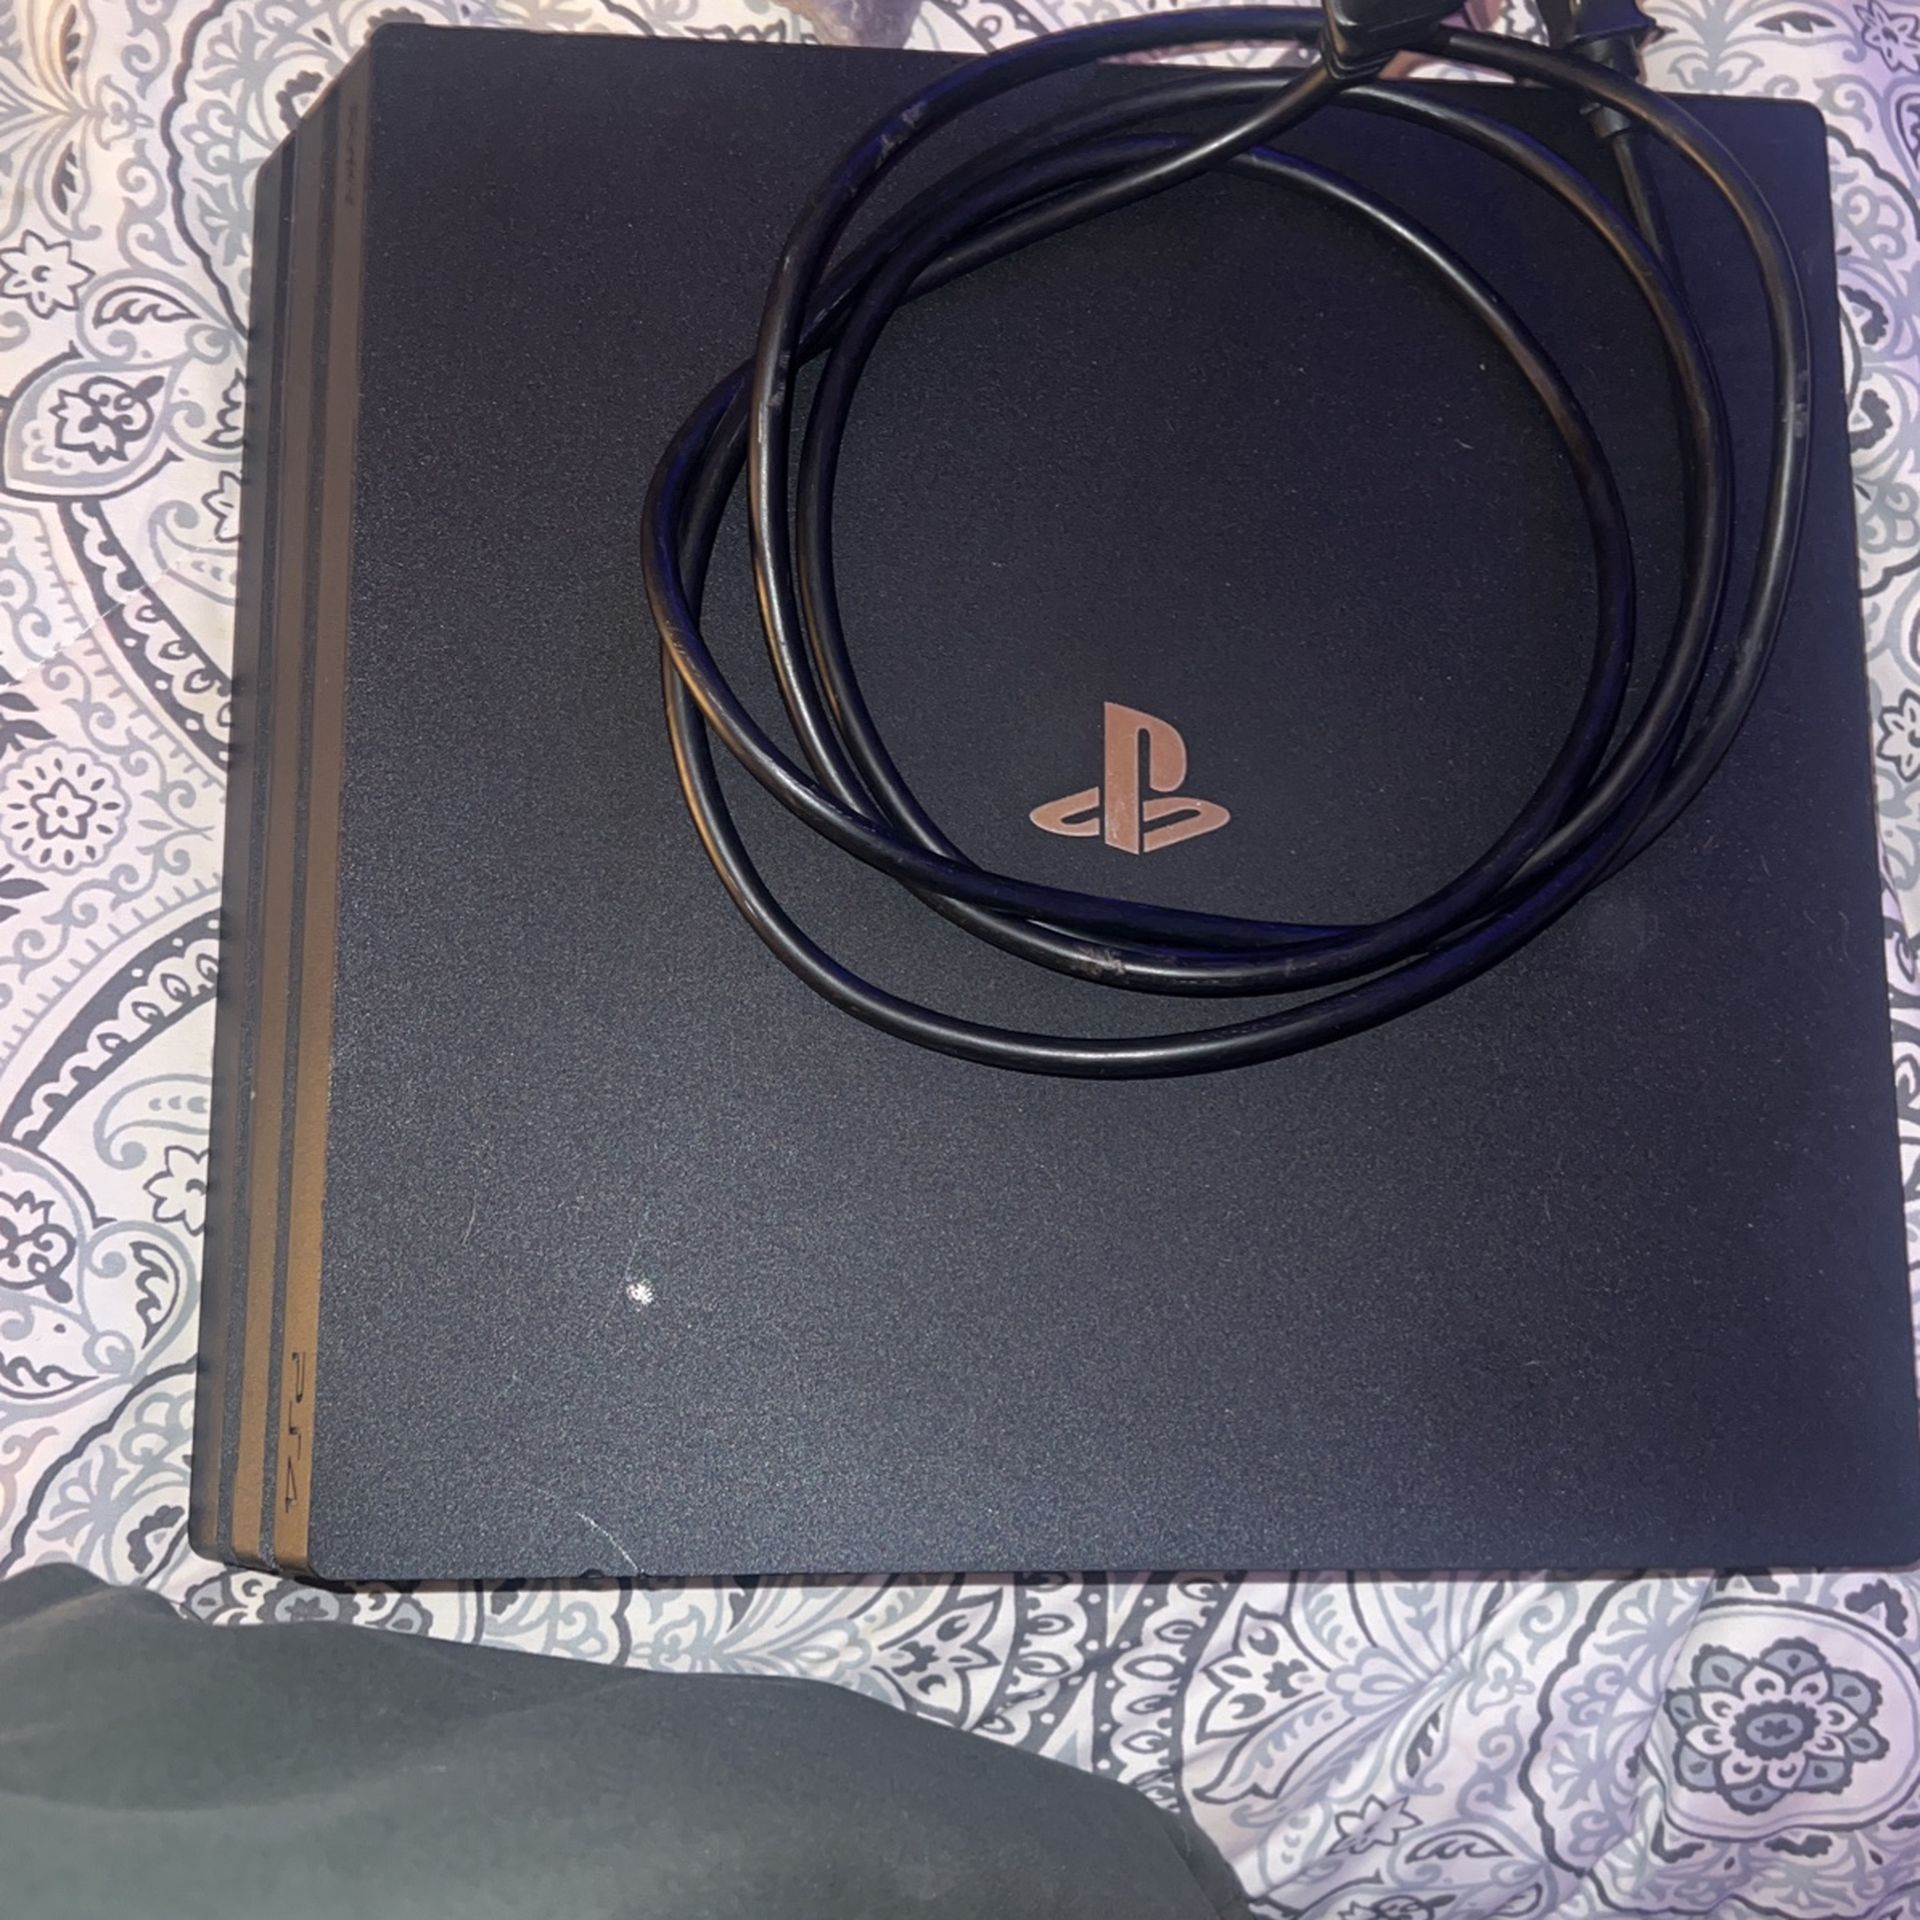 Ps4 Pro With One Controller